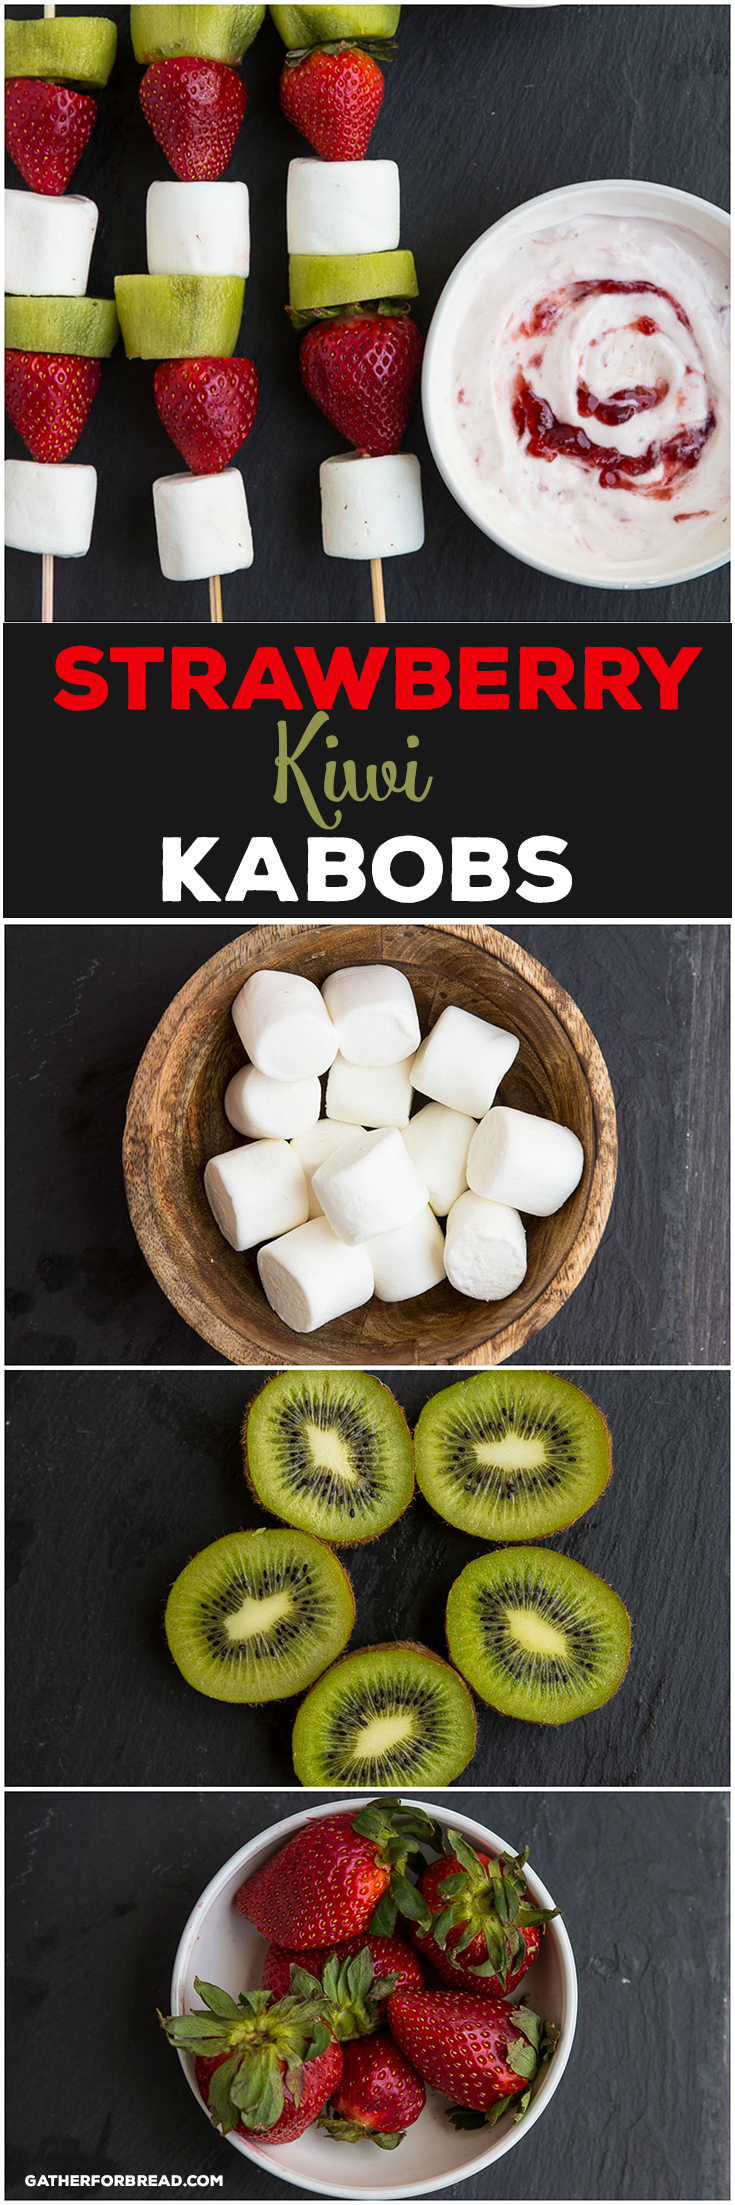 Strawberry Kiwi Kabobs - Simple, snack made in minutes with fresh strawberries, kiwi marshmallows. Easy fun, snack paired with Strawberry Greek yogurt dip. | gatherforbread.com